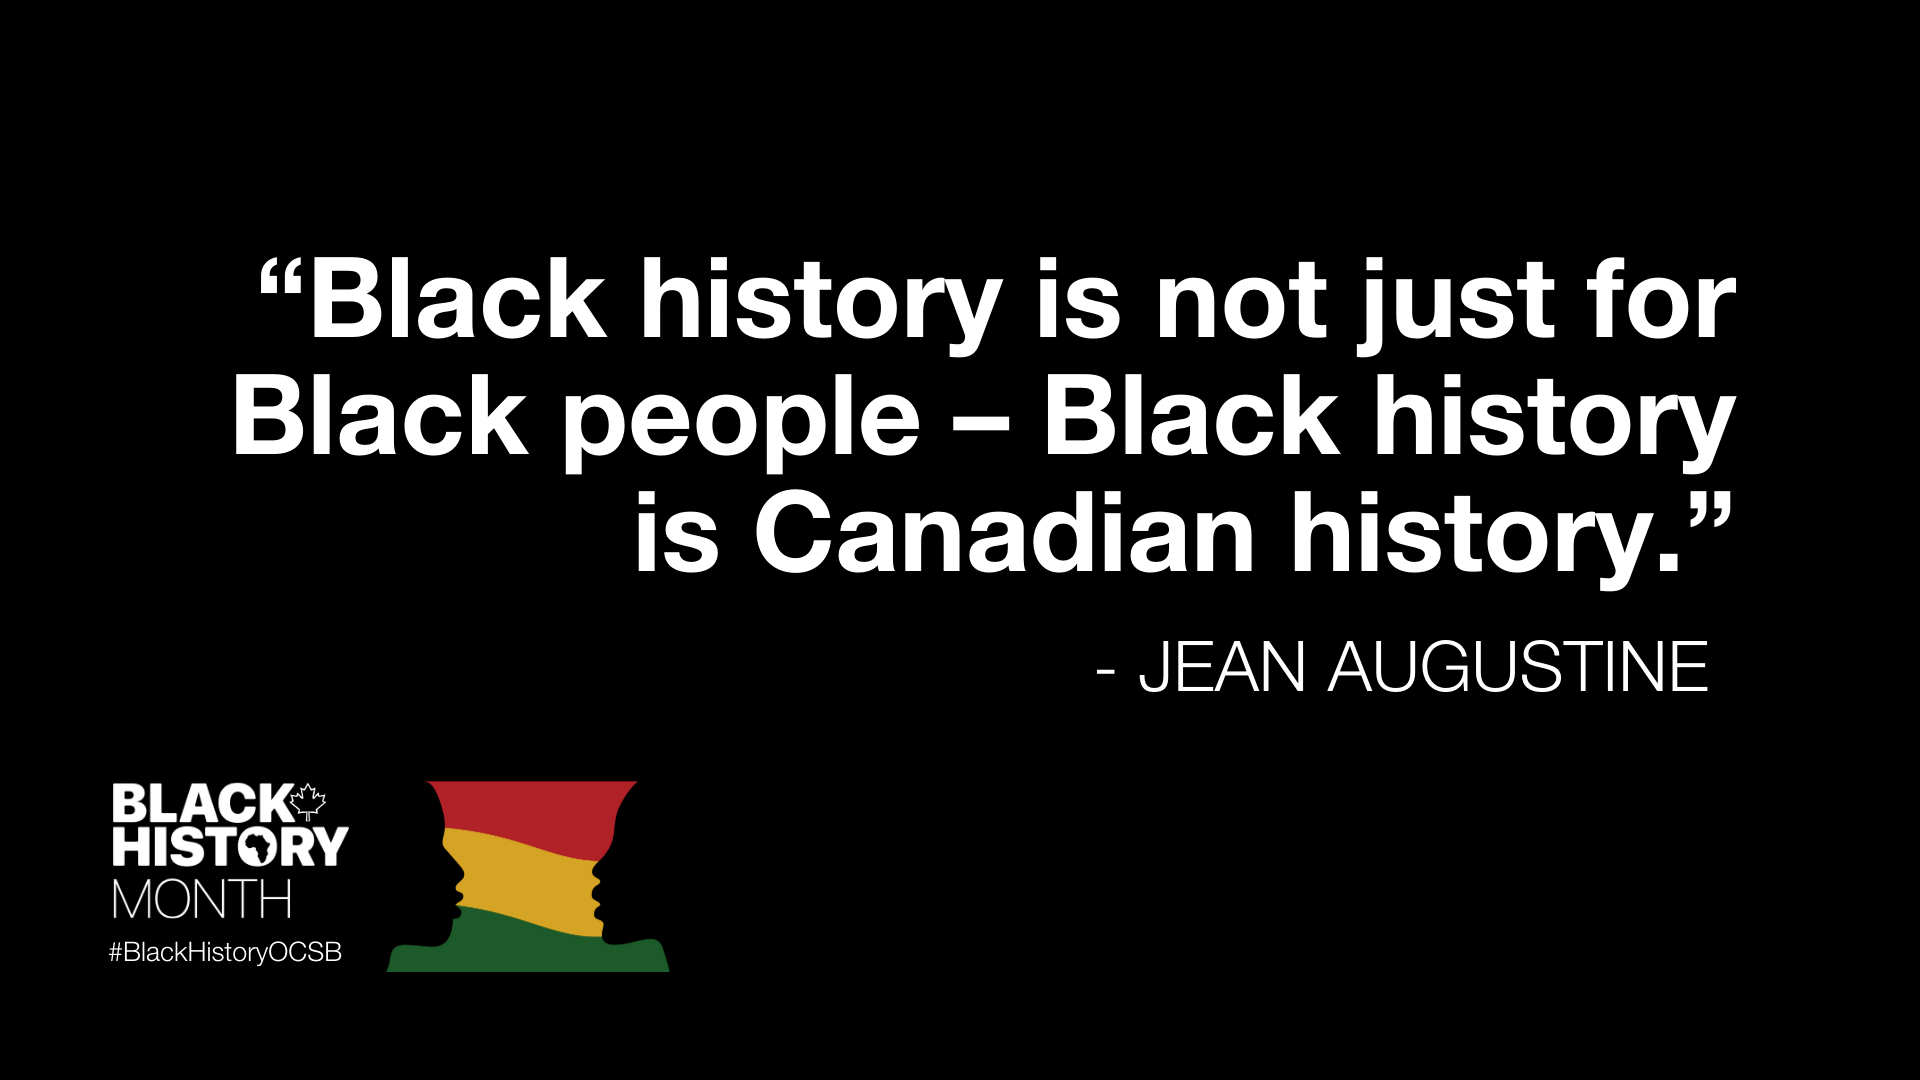 Quote By Jean Augustine About Black History Month Celebrated in Canada Every Month of February